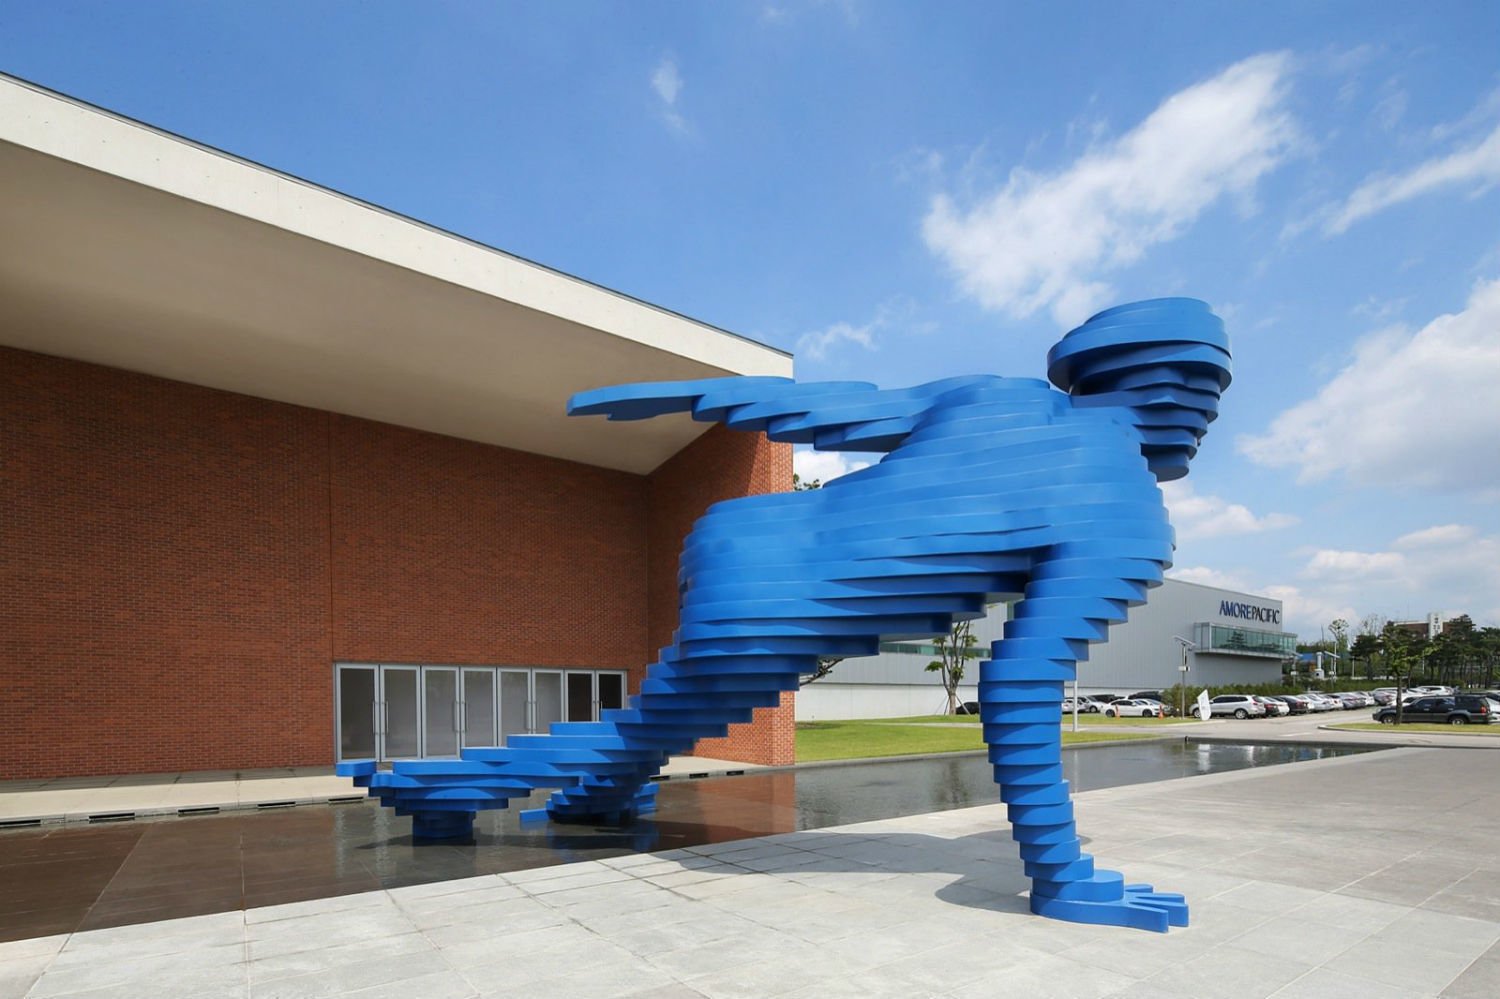 Xavier Veilhan,&nbsp;The Skater.&nbsp;Permanent installation at Amore Pacific, Seoul, South Korea, 2014